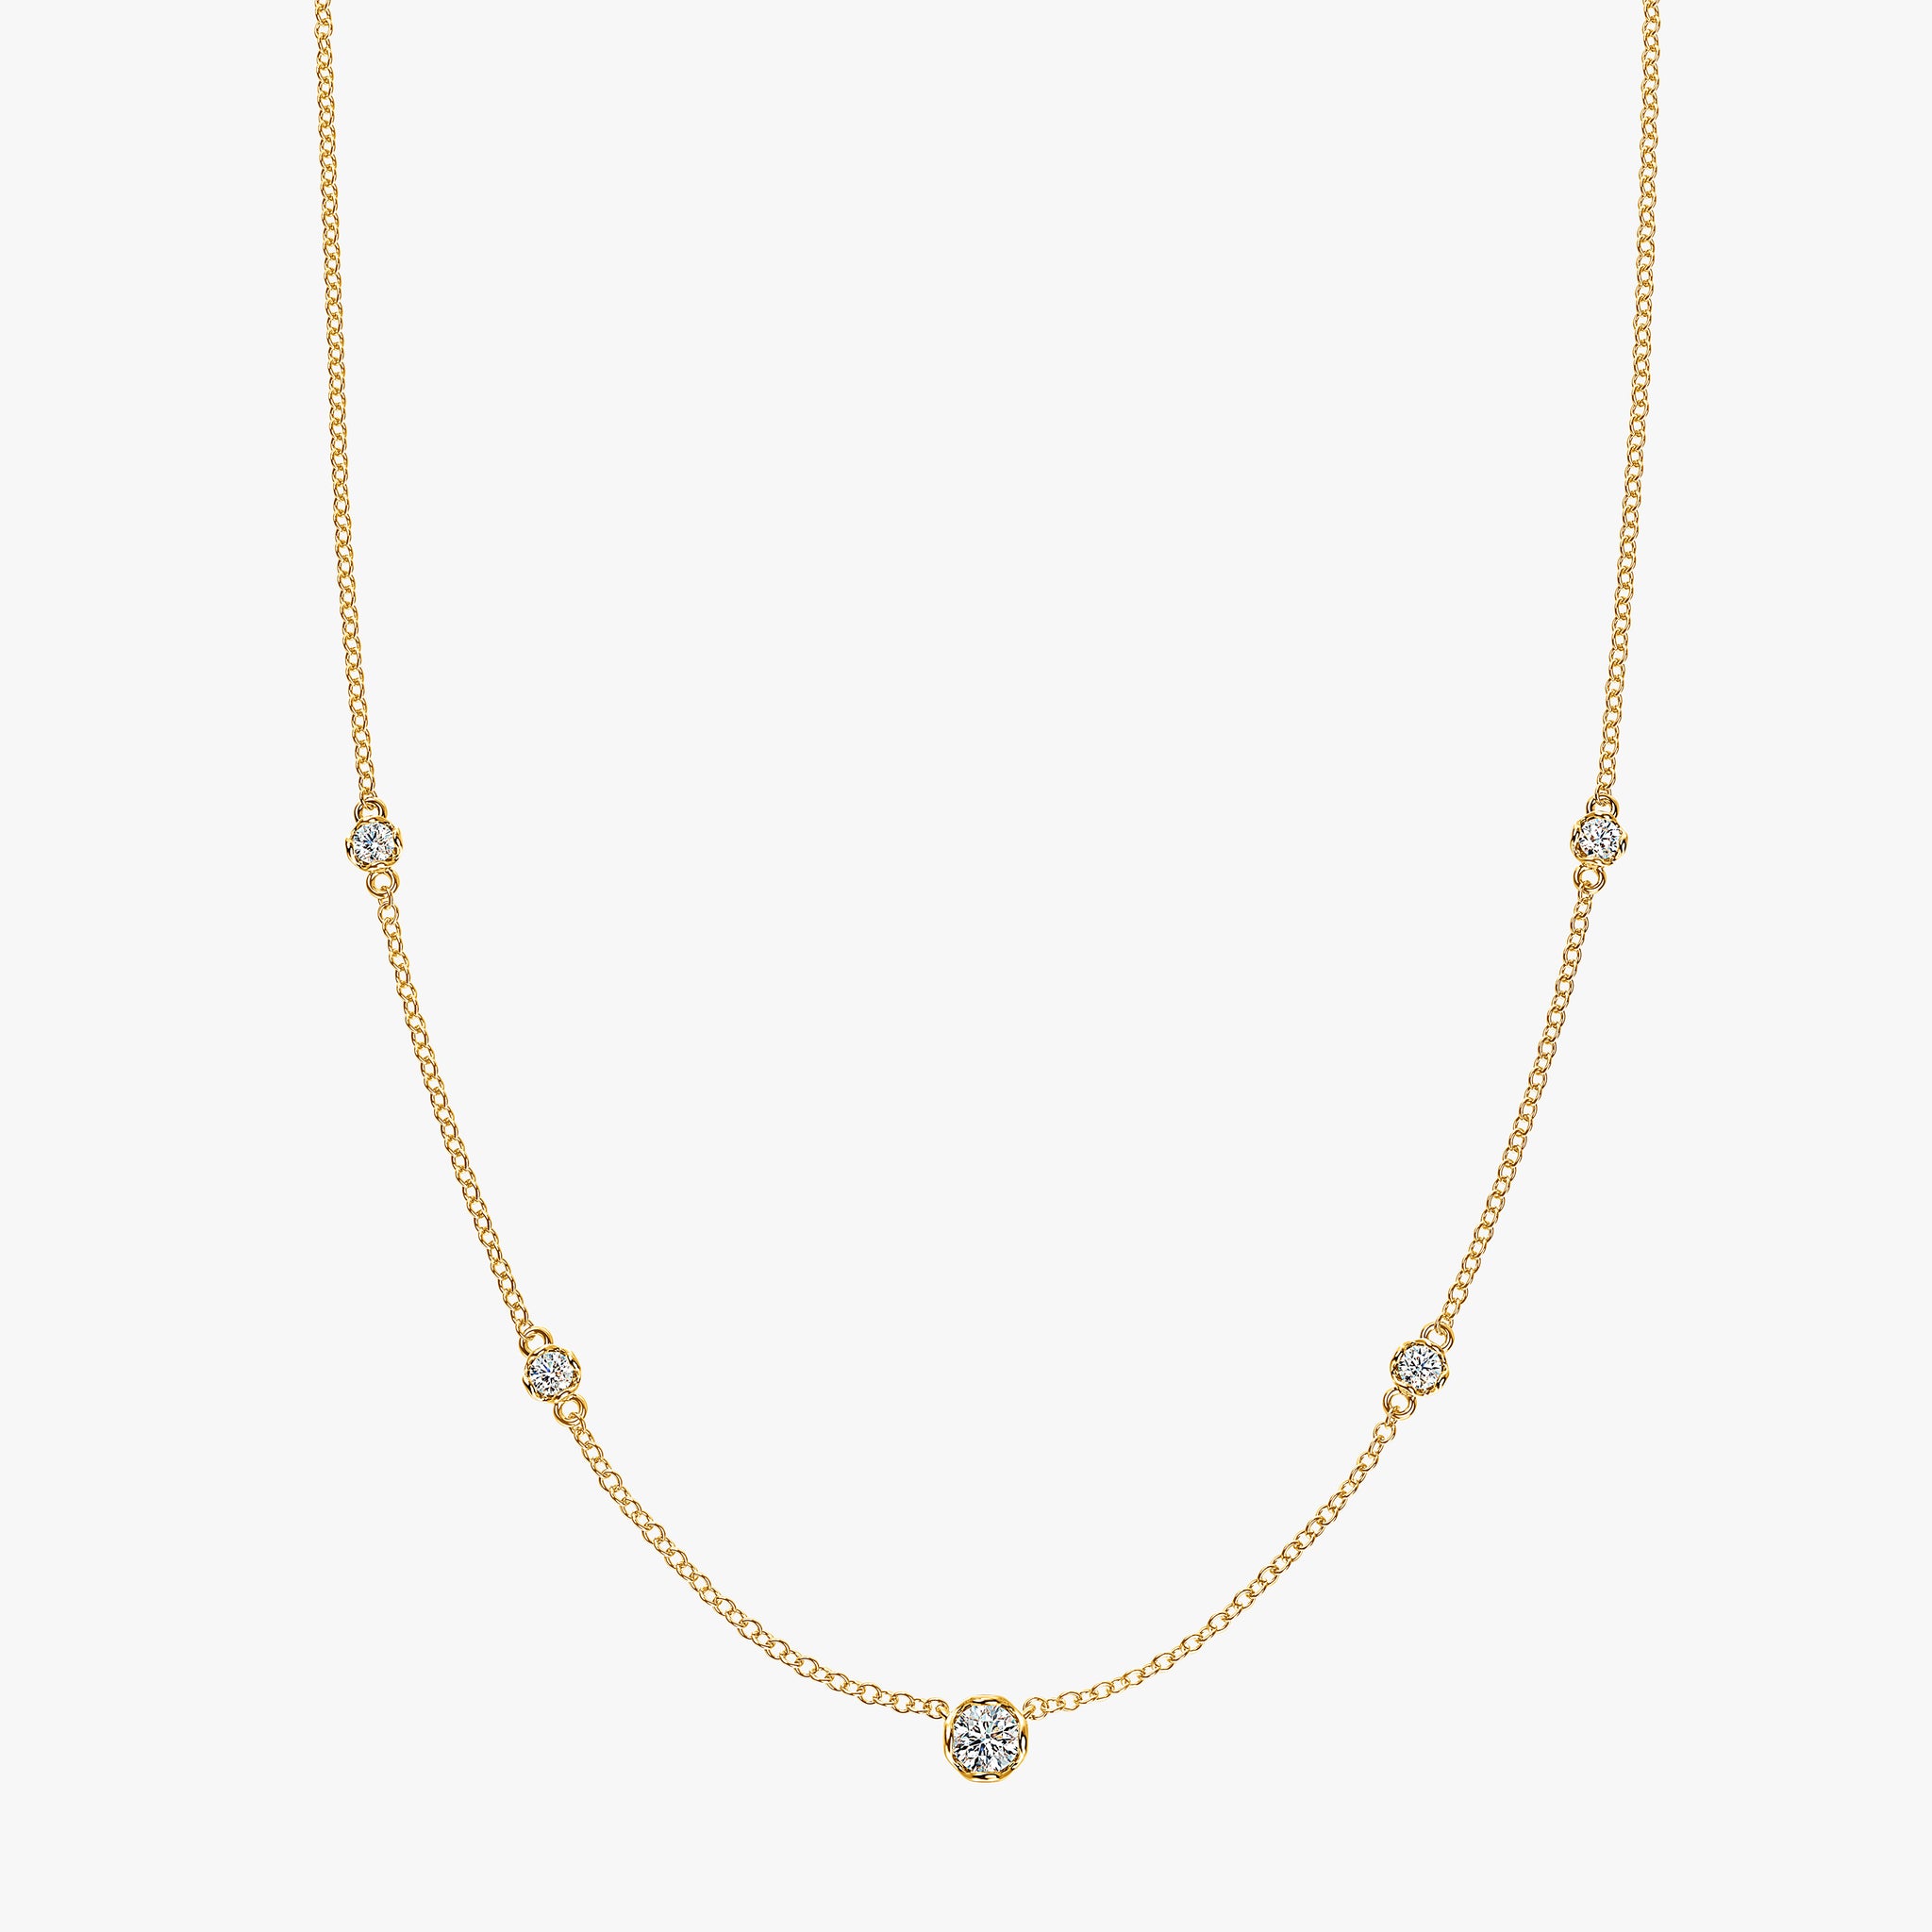 J'EVAR 14KT Yellow Gold By The Yard ALTR Lab Grown Diamond Necklace Lock View